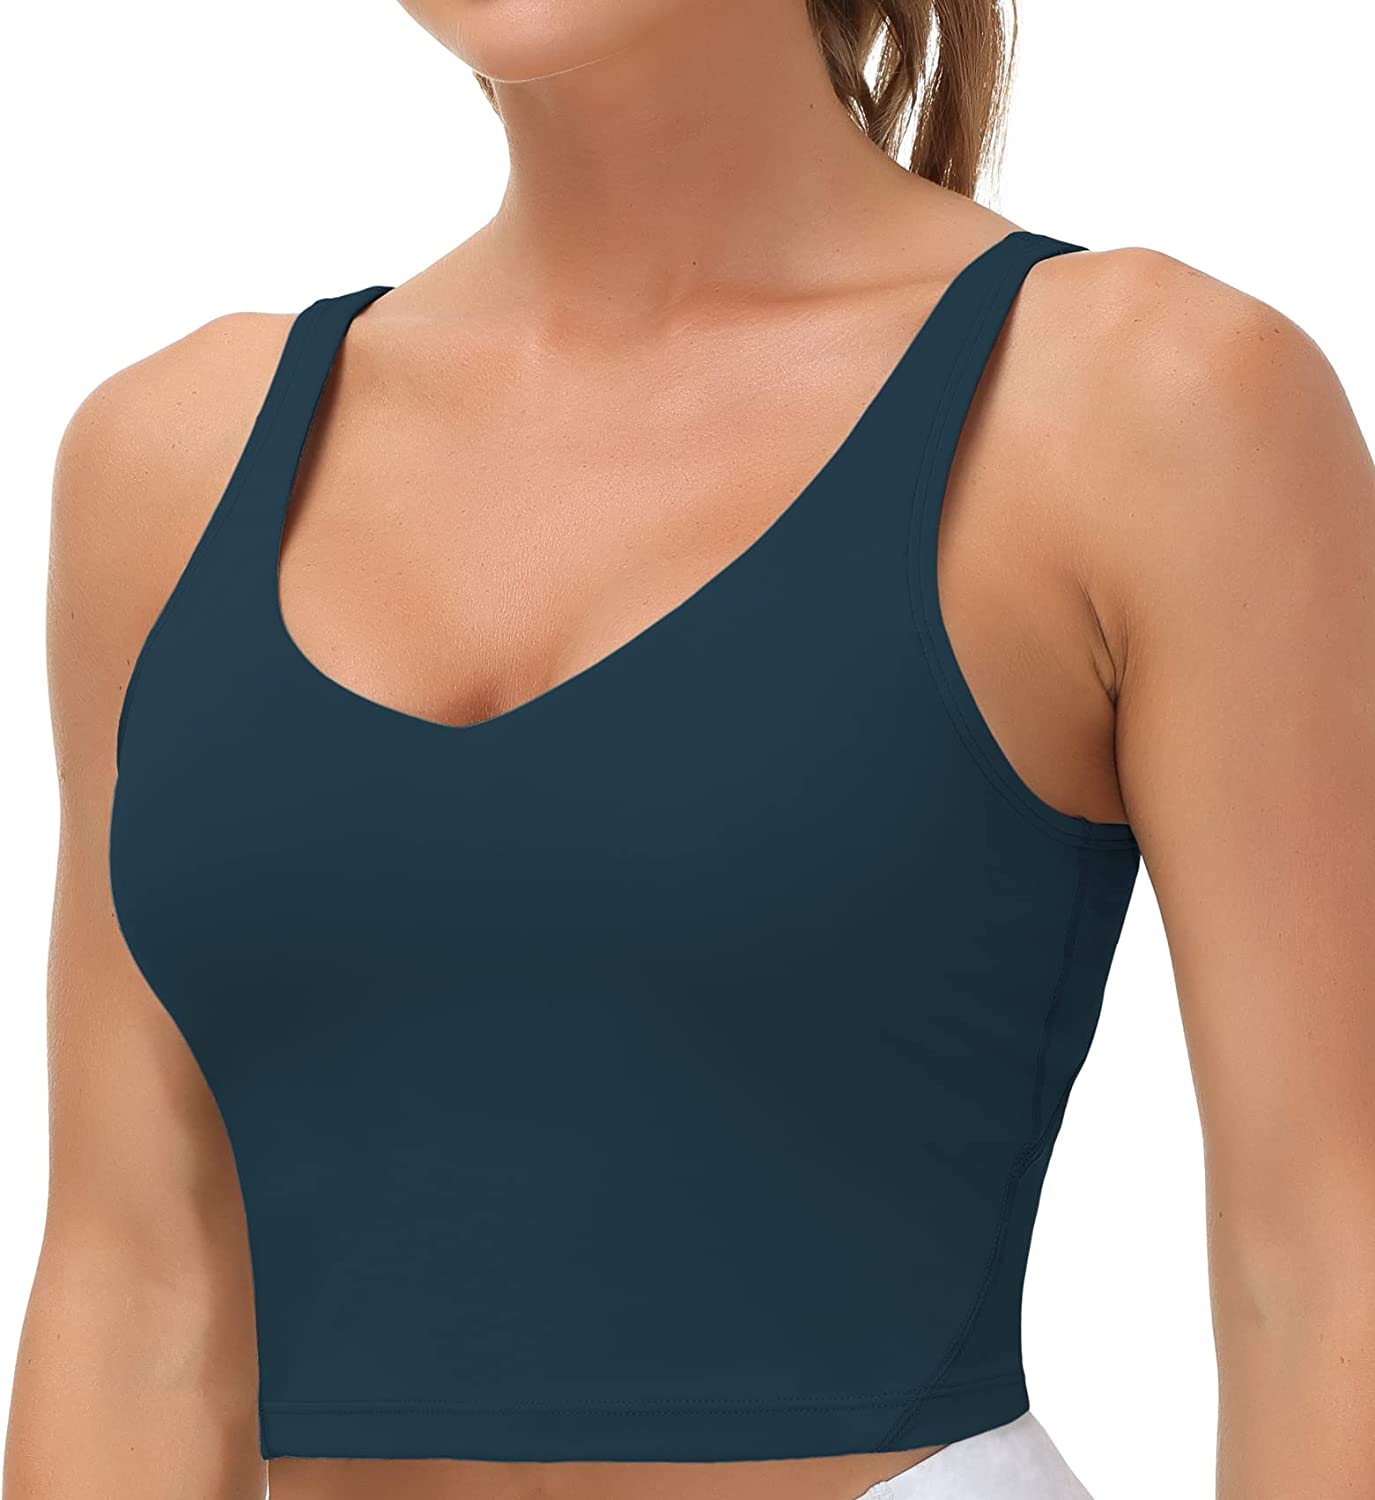 THE GYM PEOPLE Womens' Sports Bra Longline Wirefree Padded with Medium  Support - Bitgree